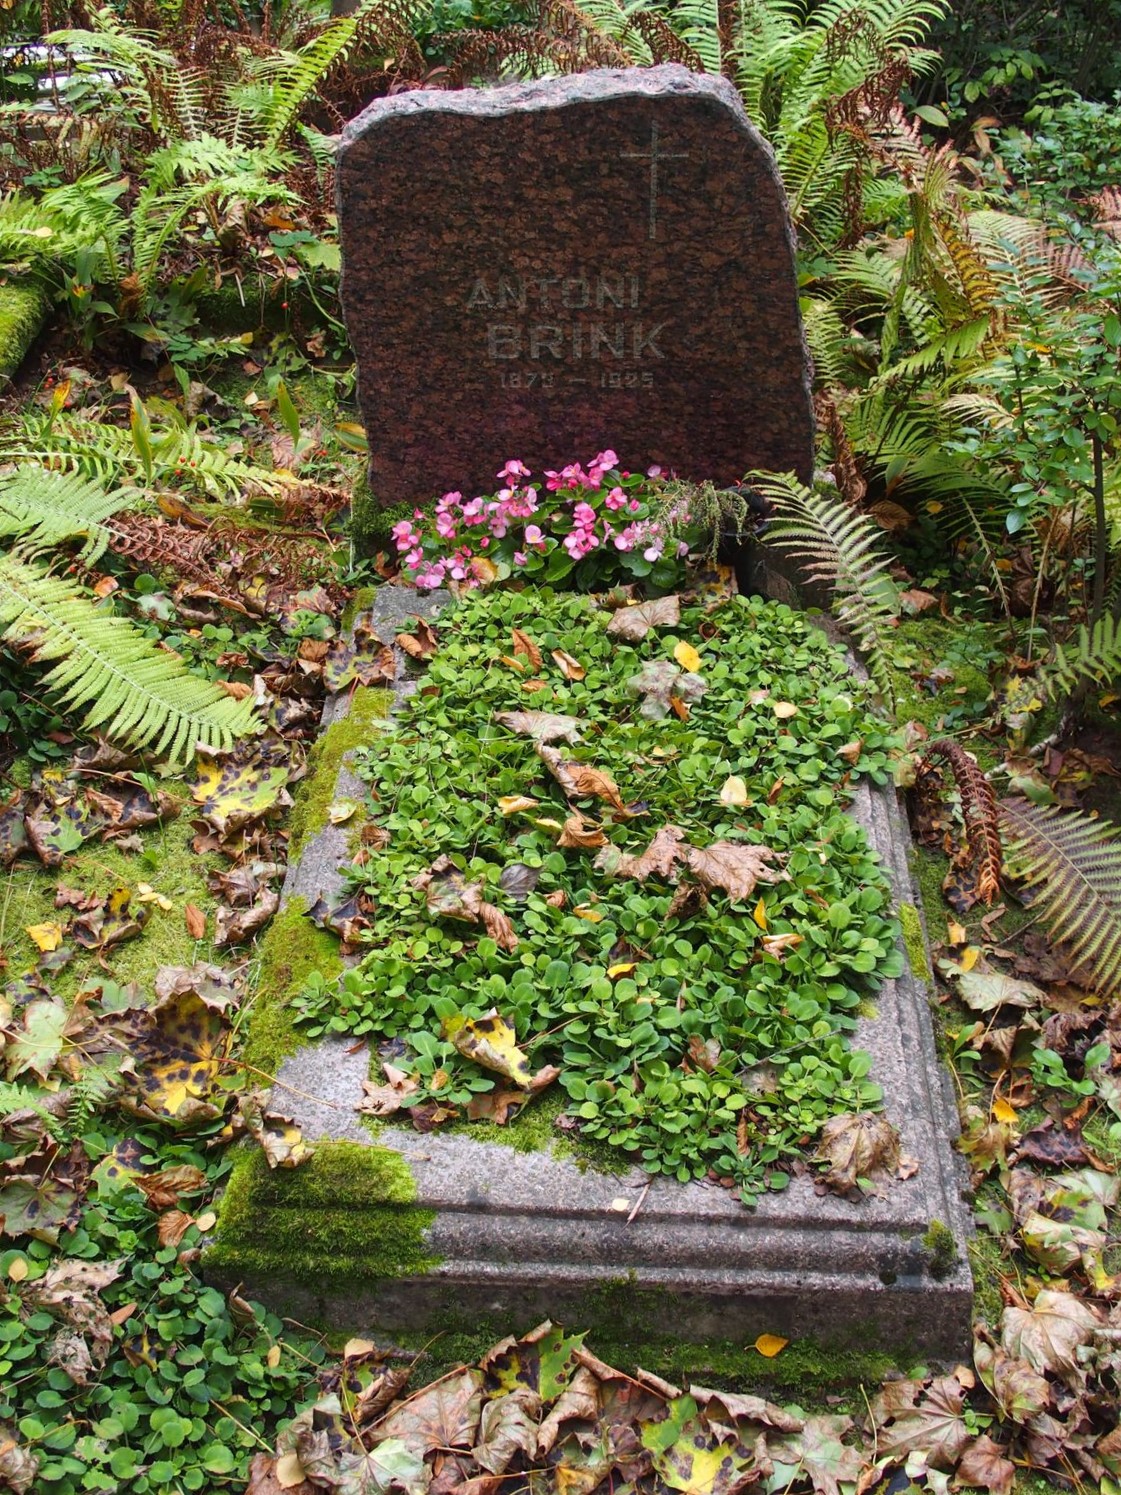 Tombstone of Antoni Brink, St Michael's cemetery in Riga, as of 2021.